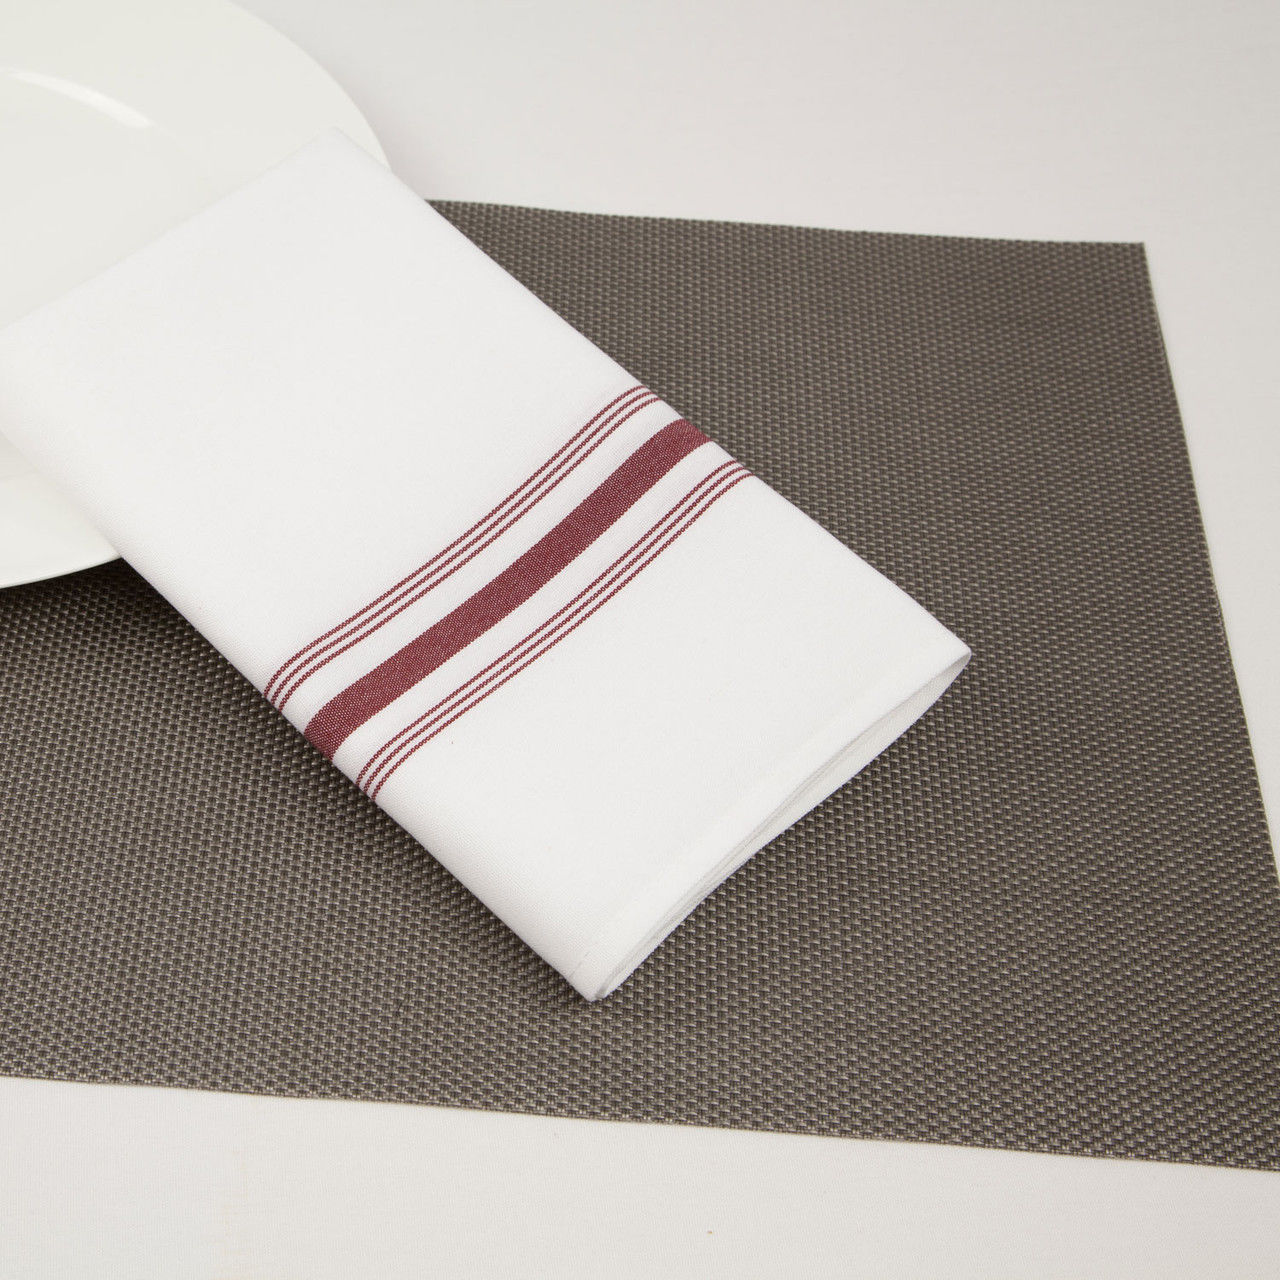 What are the dimensions of these Riegel's Vinyl Woven Placemats?